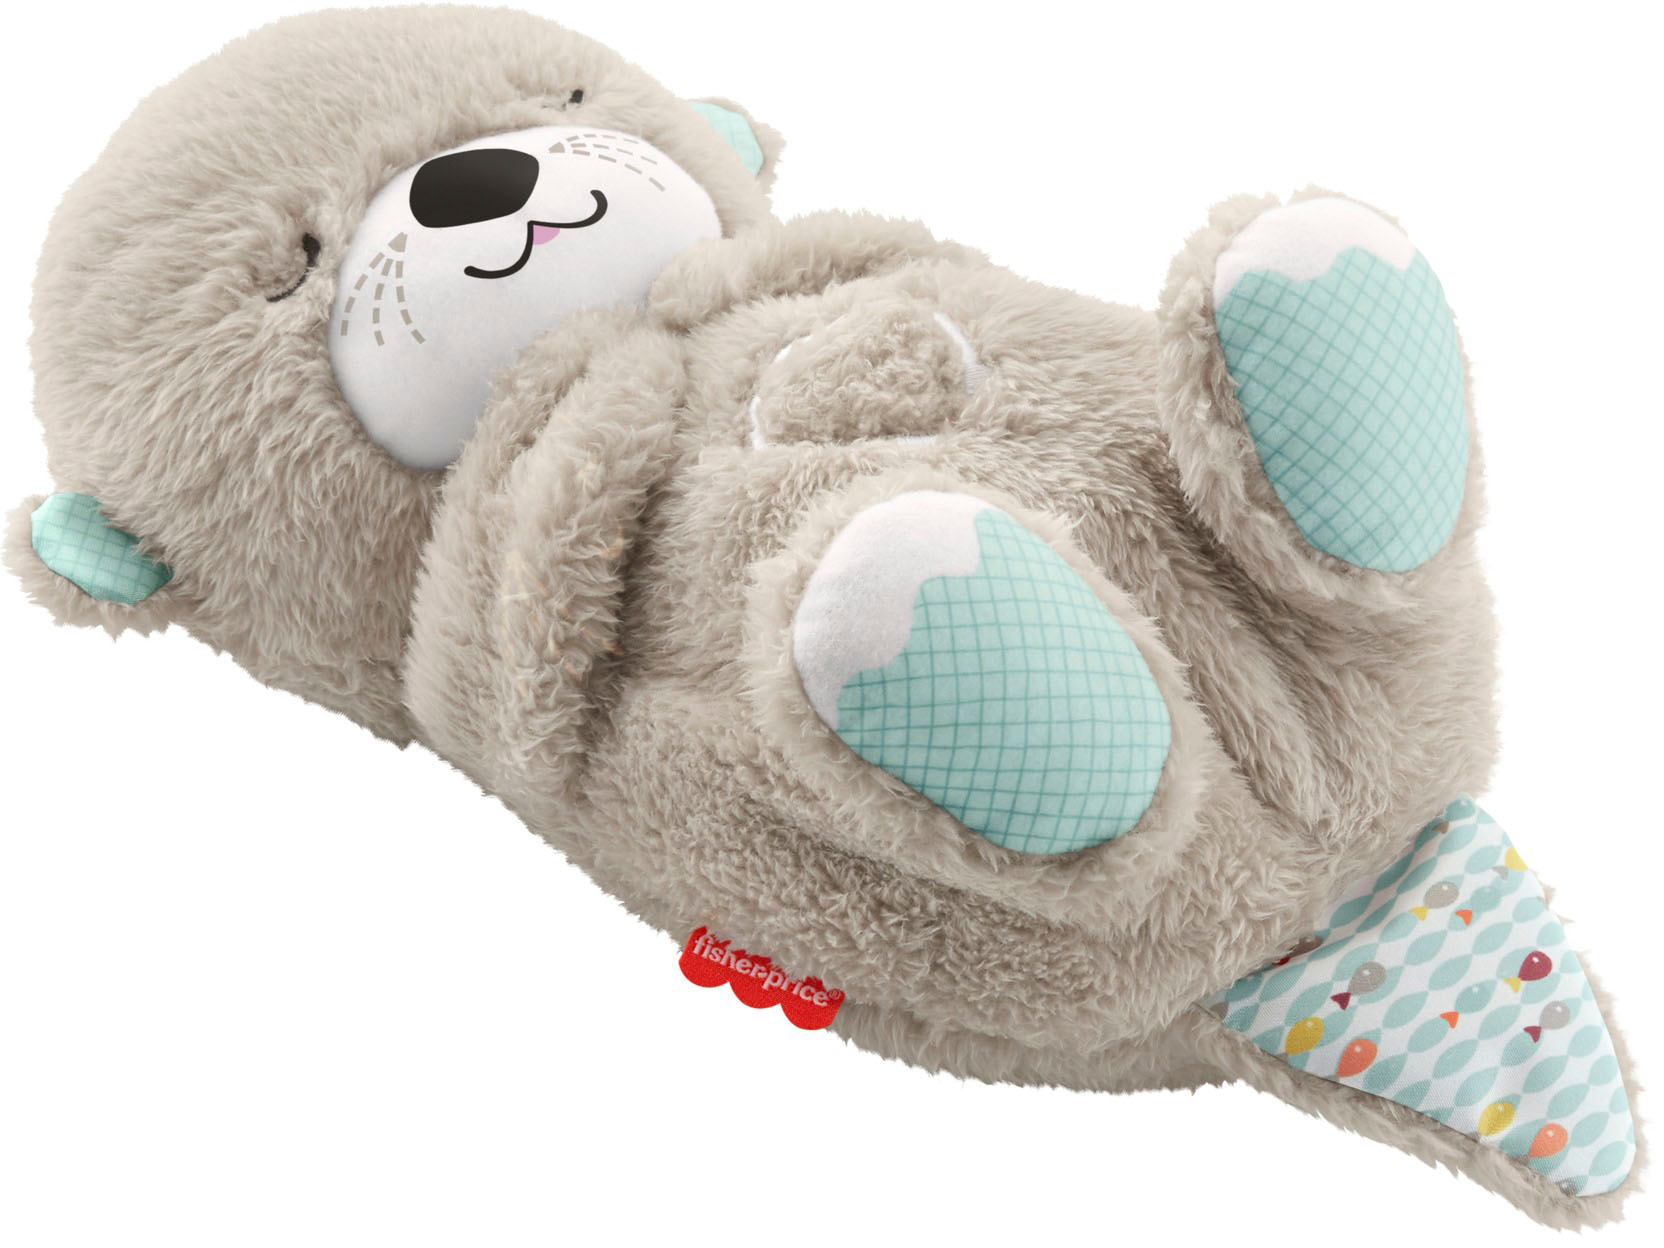 Sleep Companion-Soothe'n Snuggle Otter-Simulated Breathing Plush Toy Warm  Lights